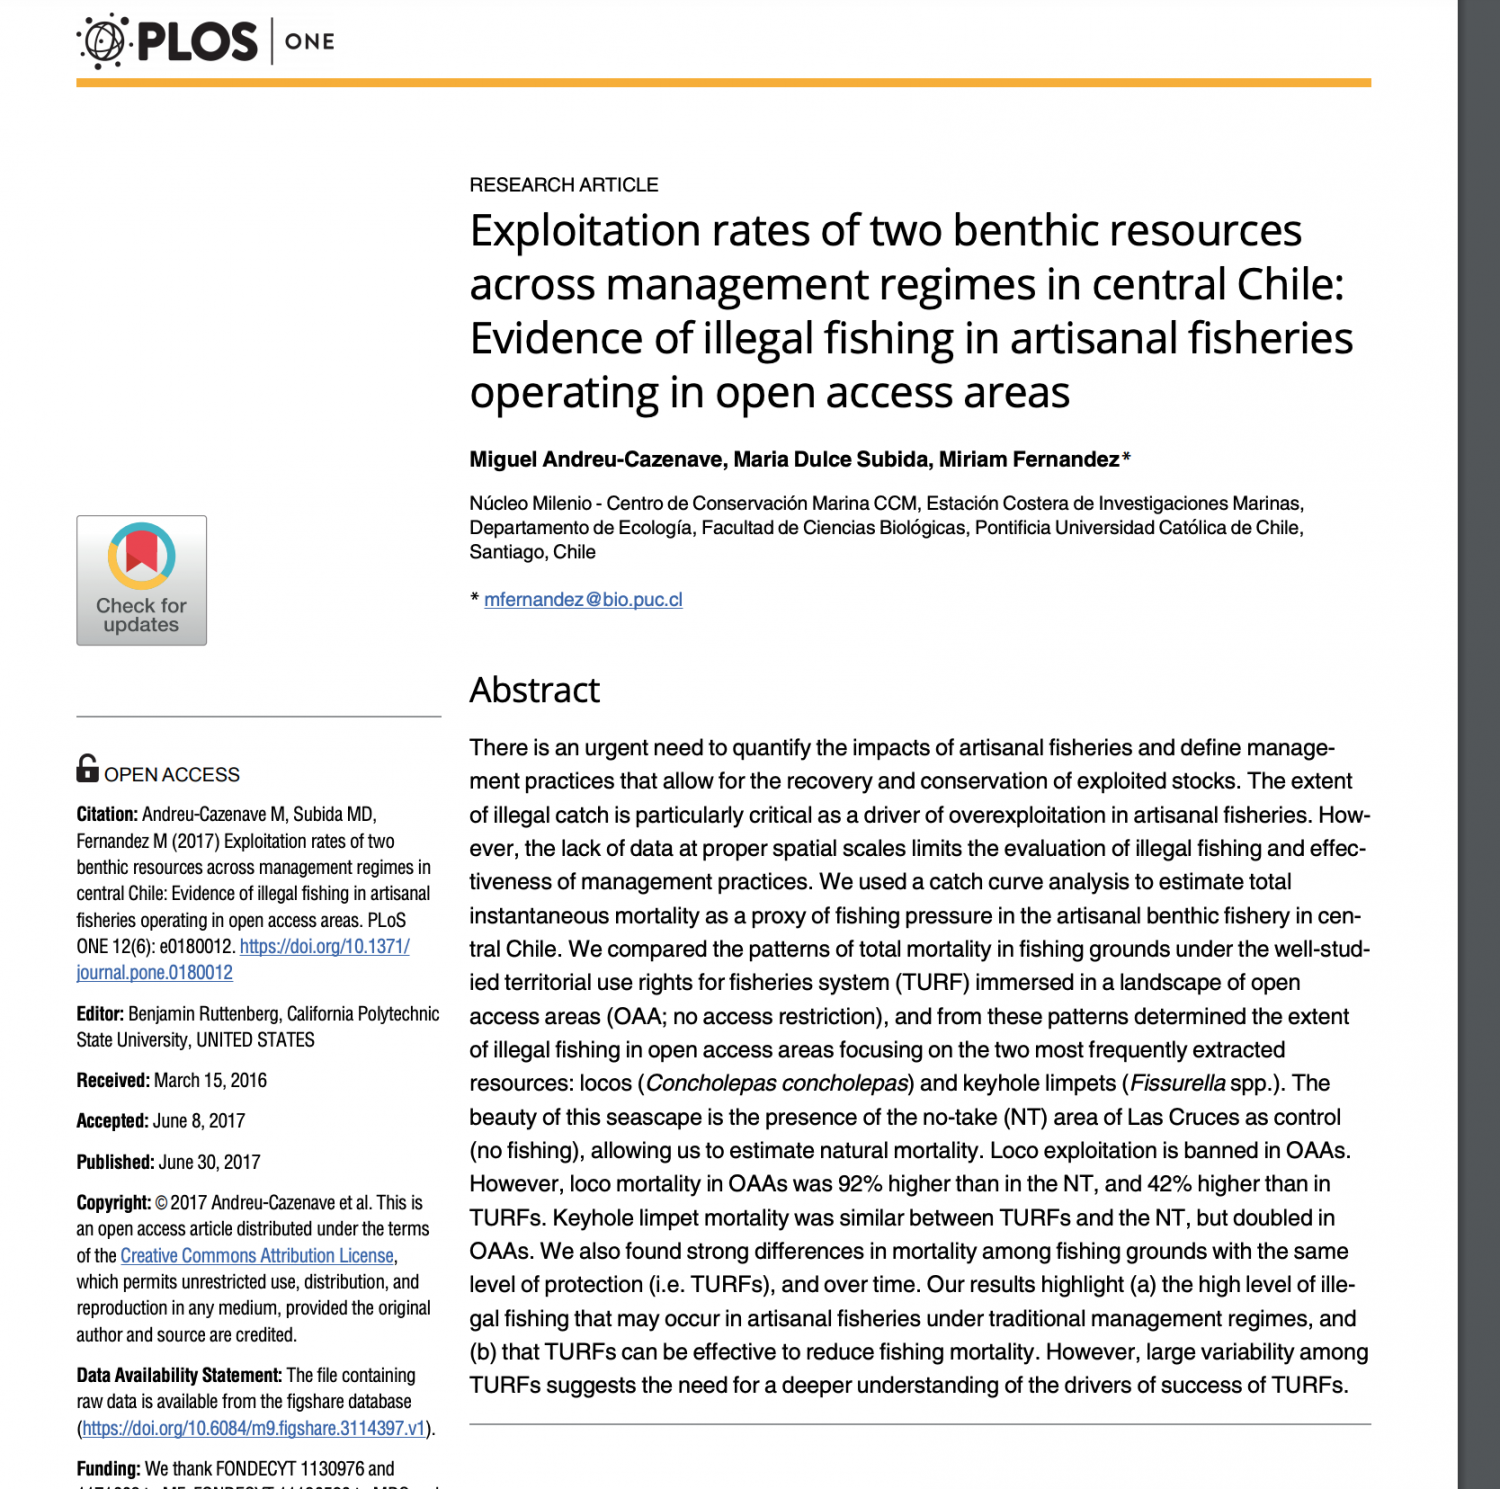 Exploitation rates of resources across management regimes in Chile: Illegal fishing in open access areas